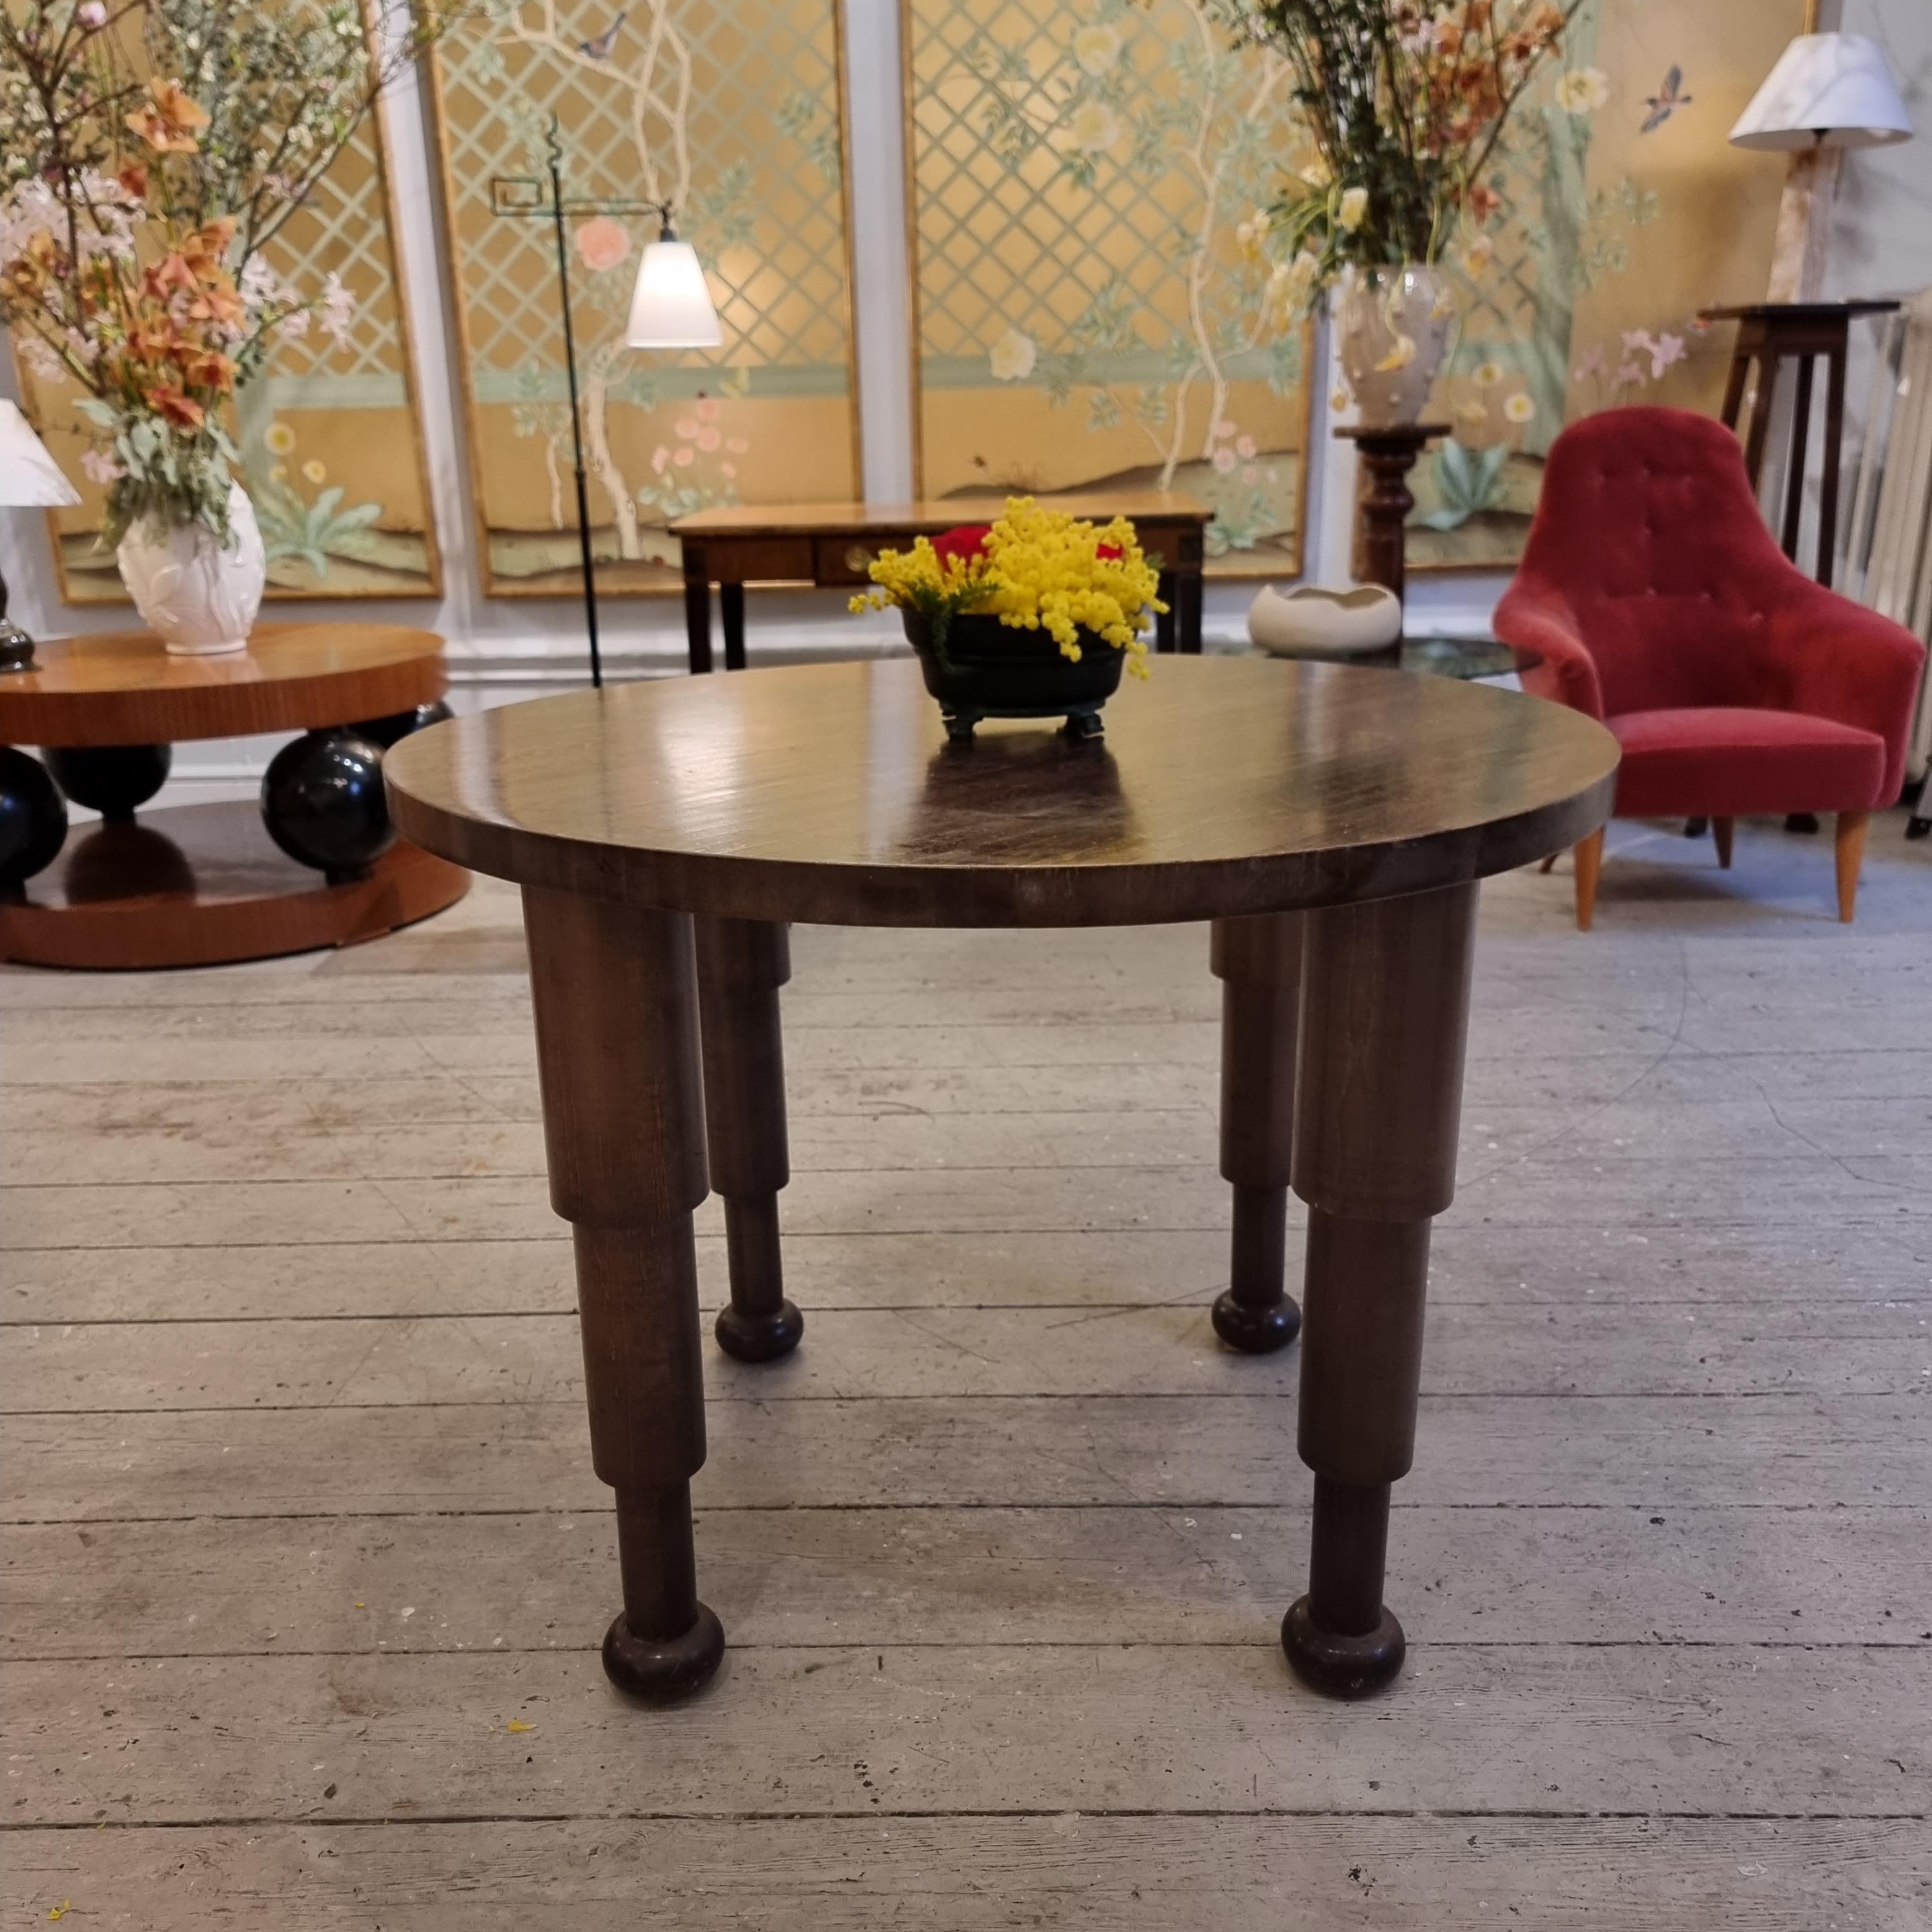 A one of a kind Art Deco / 1930s table in stained beech. Found in Finland. The table feet remind of Märta Blomstedts easy chair. 

Legs have a futuristic style, this is an unique and decorative table that would bring cool elegance to most interiors.